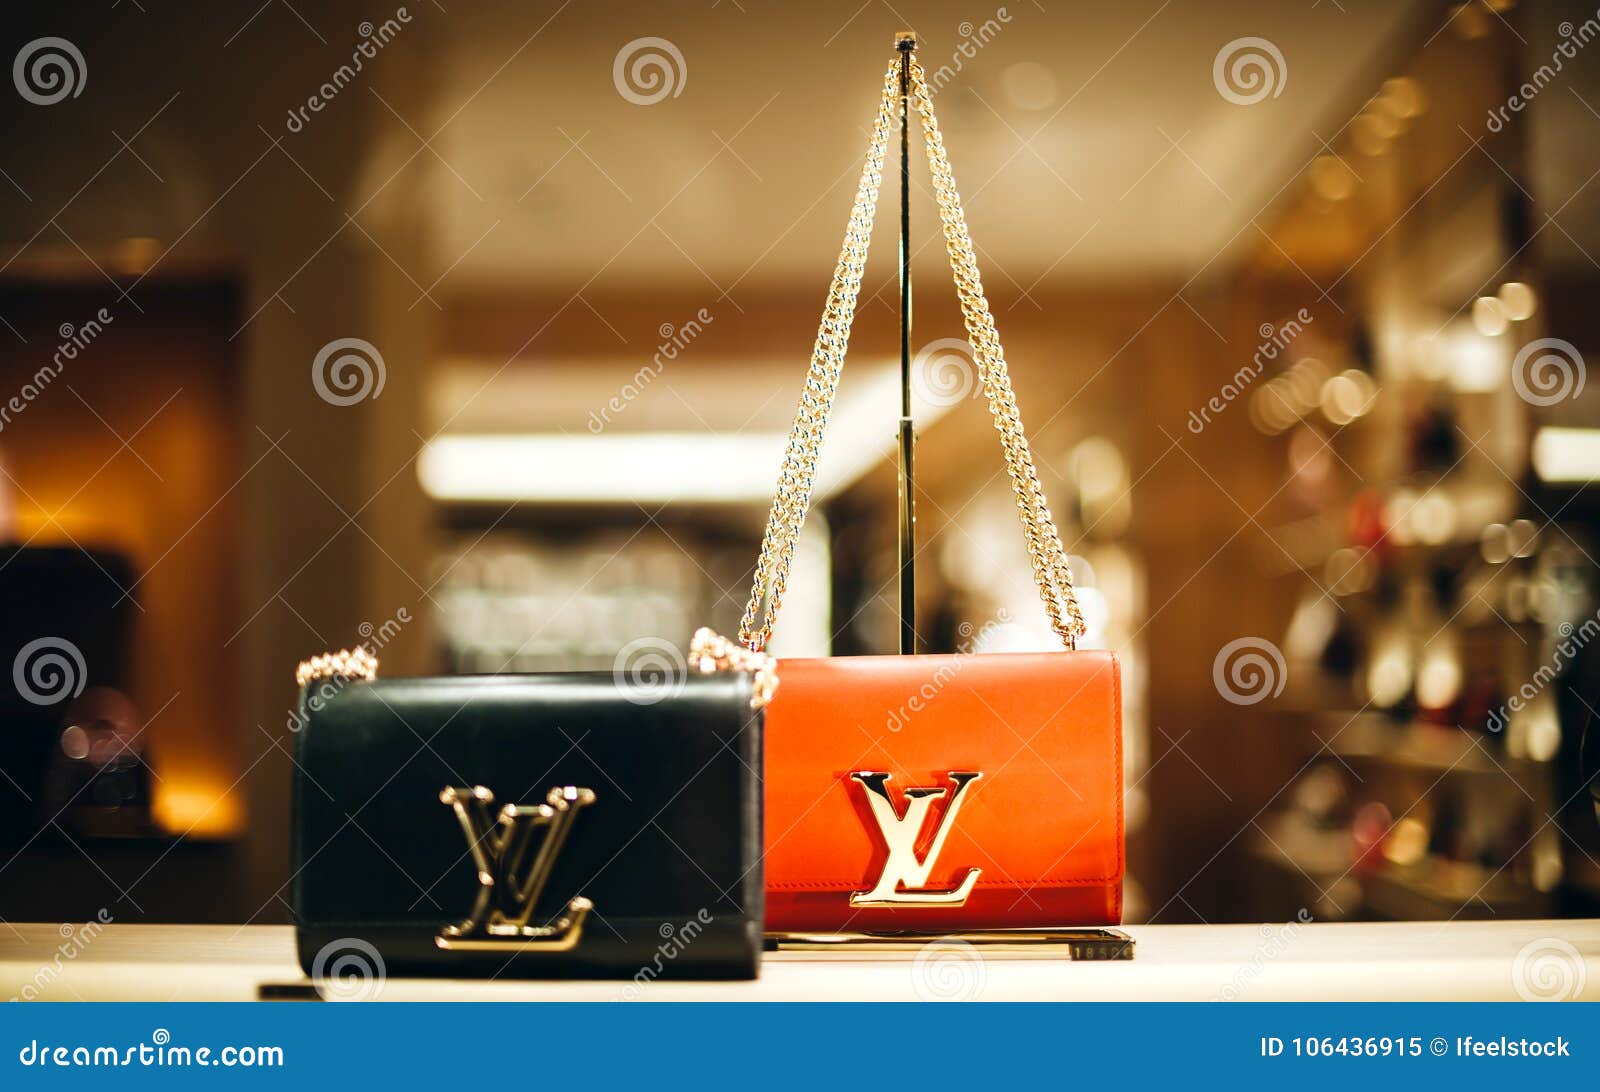 Luxury Leather Louis Vuitton LVMH Leather Bags Editorial Image - Image of  elegance, leather: 106436915